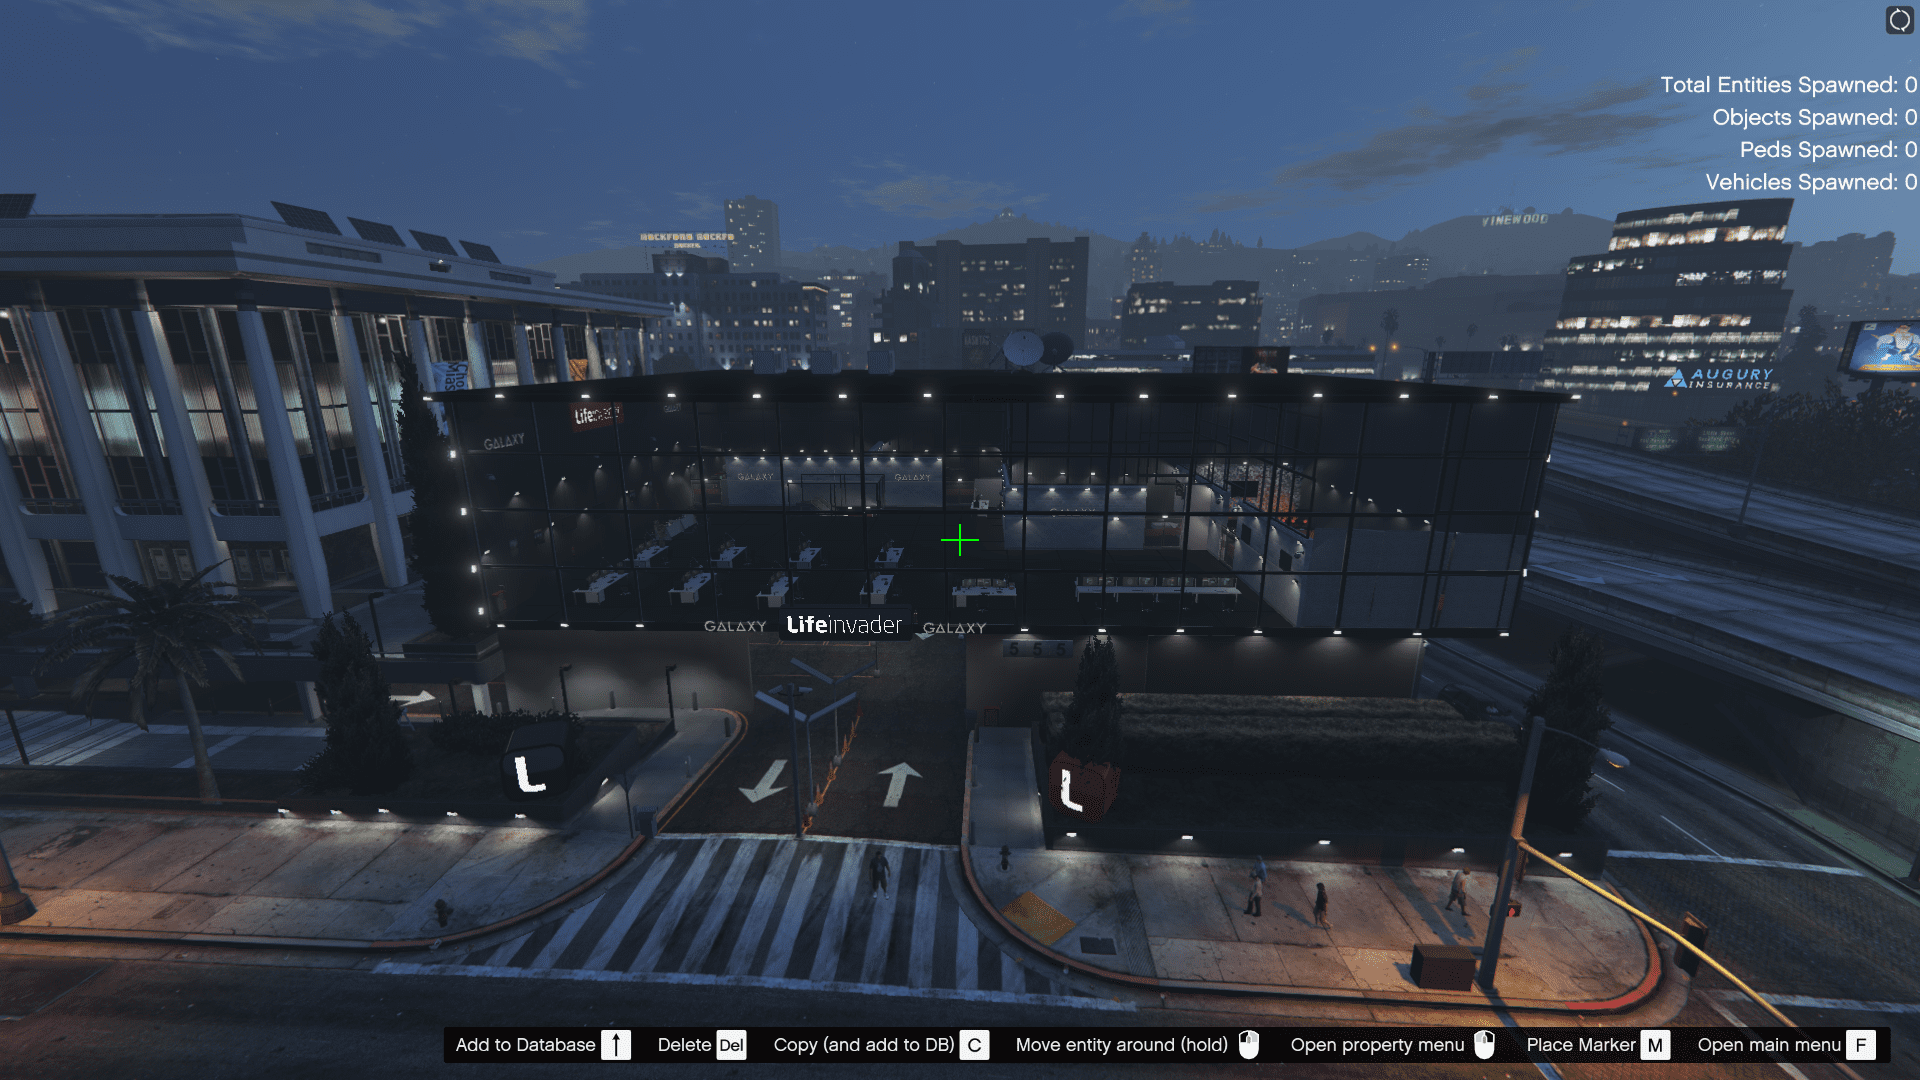 GTA V Map: Lifeinvader Building - , The Video Games Wiki